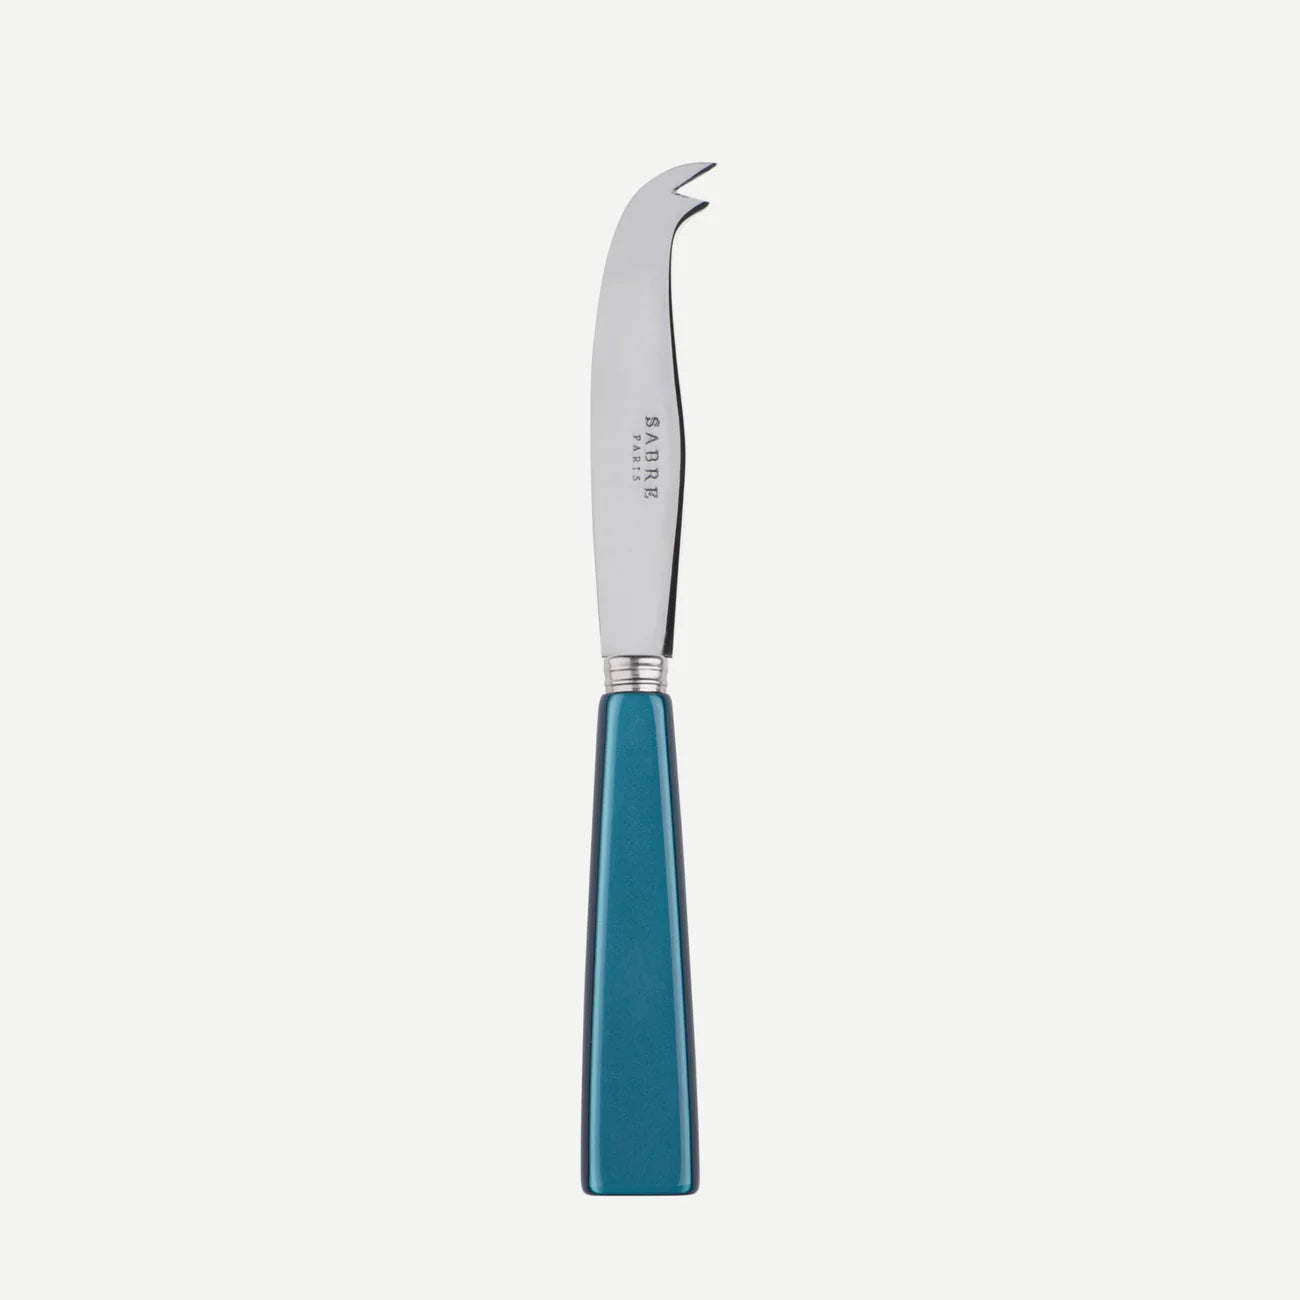 A small sabre paris cheese knife with a turquoise coloured handle. 